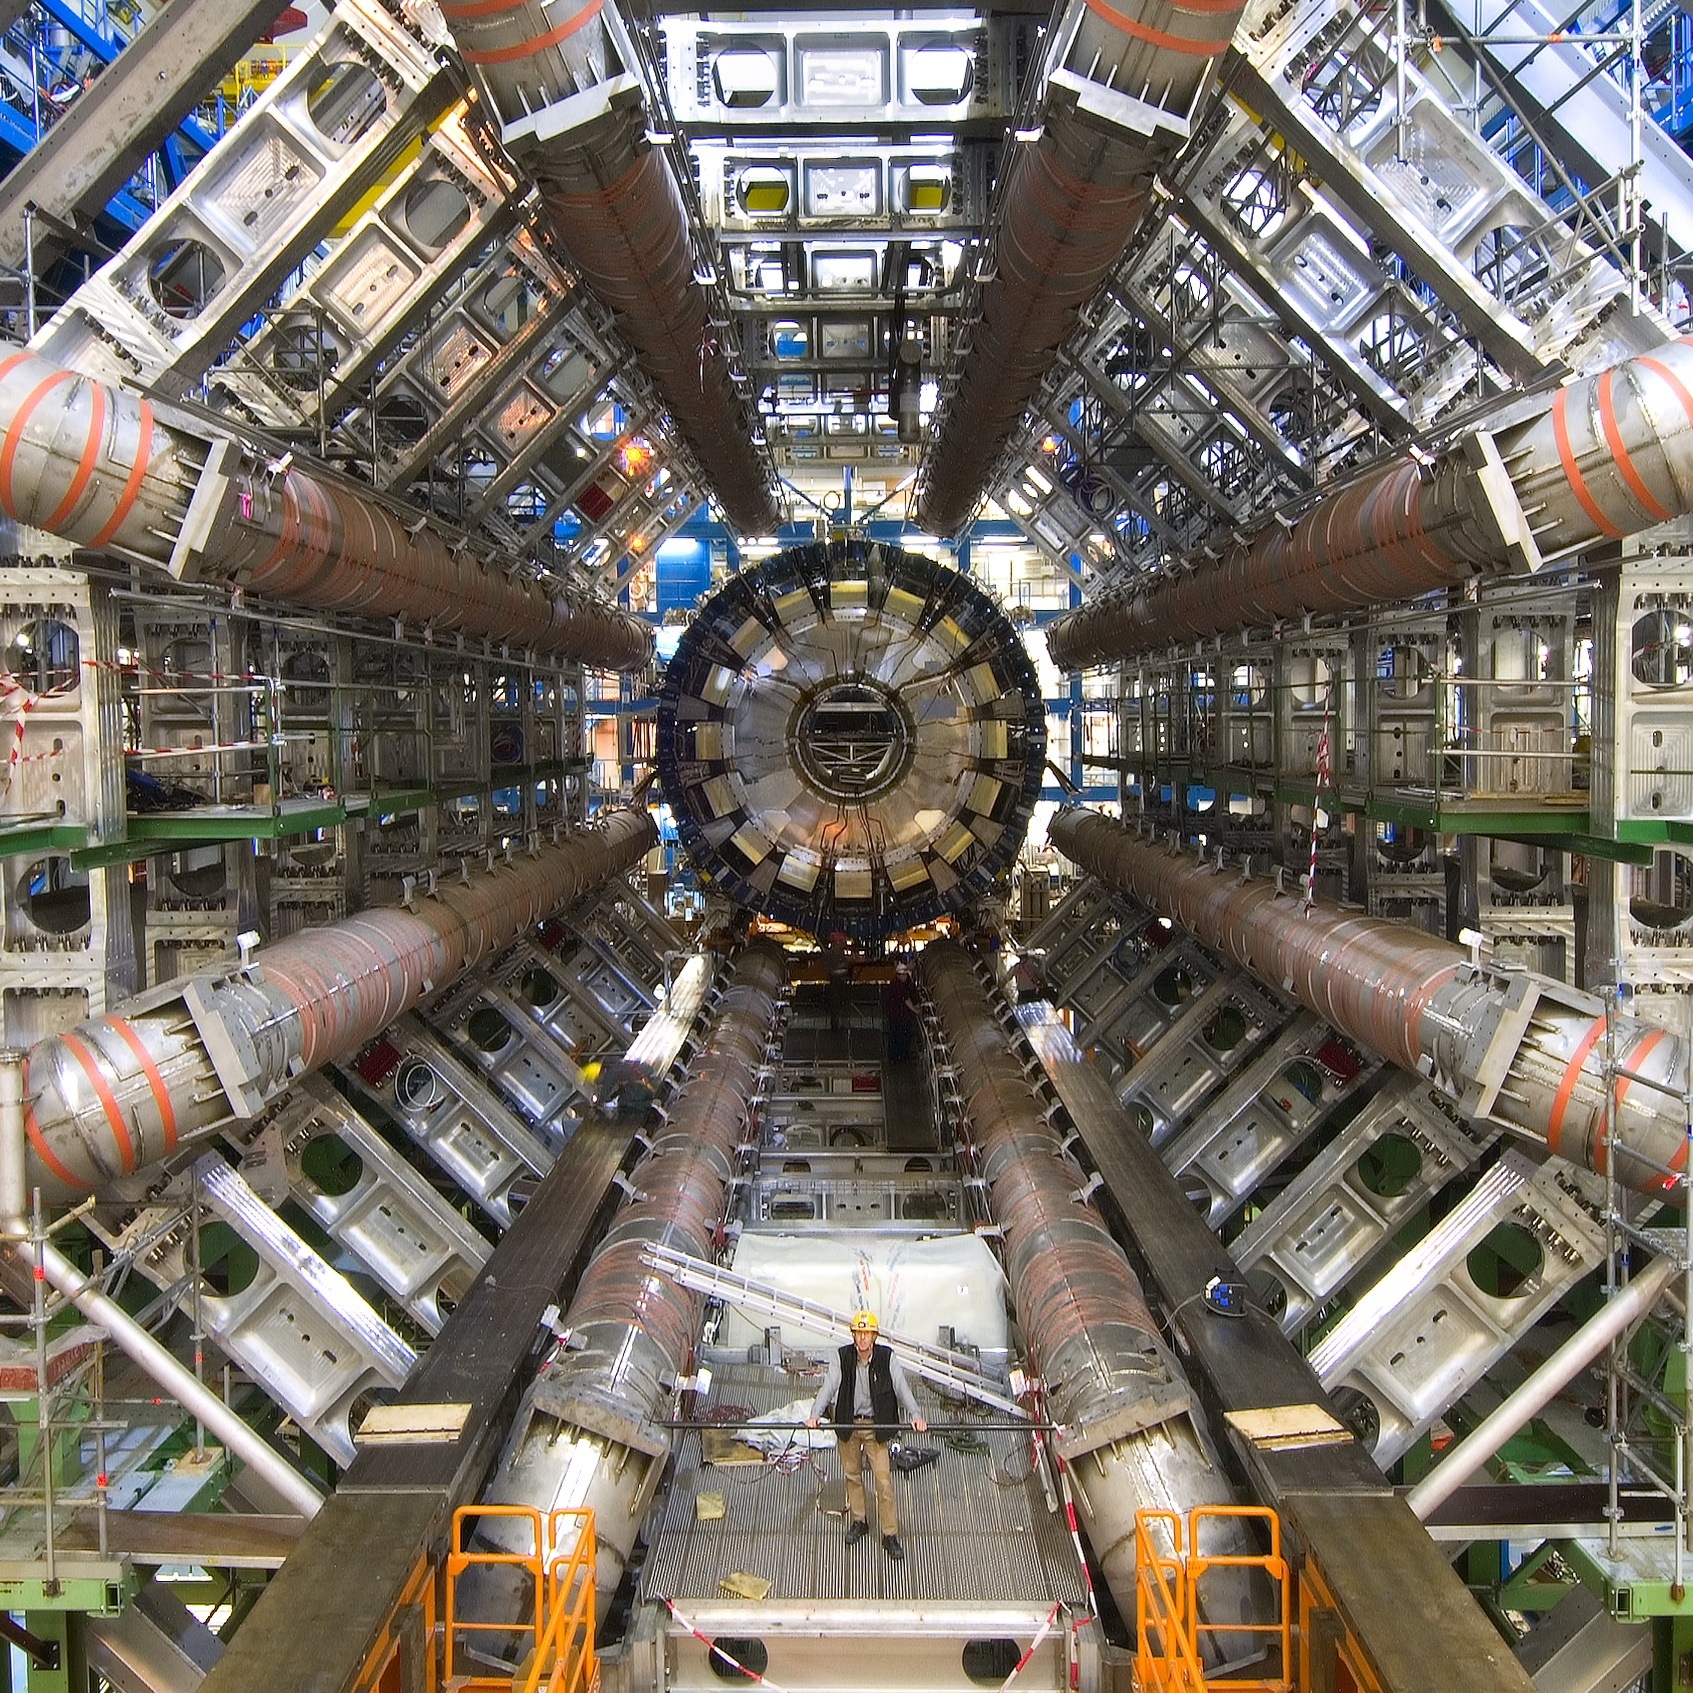 Searching for Supersymmetry